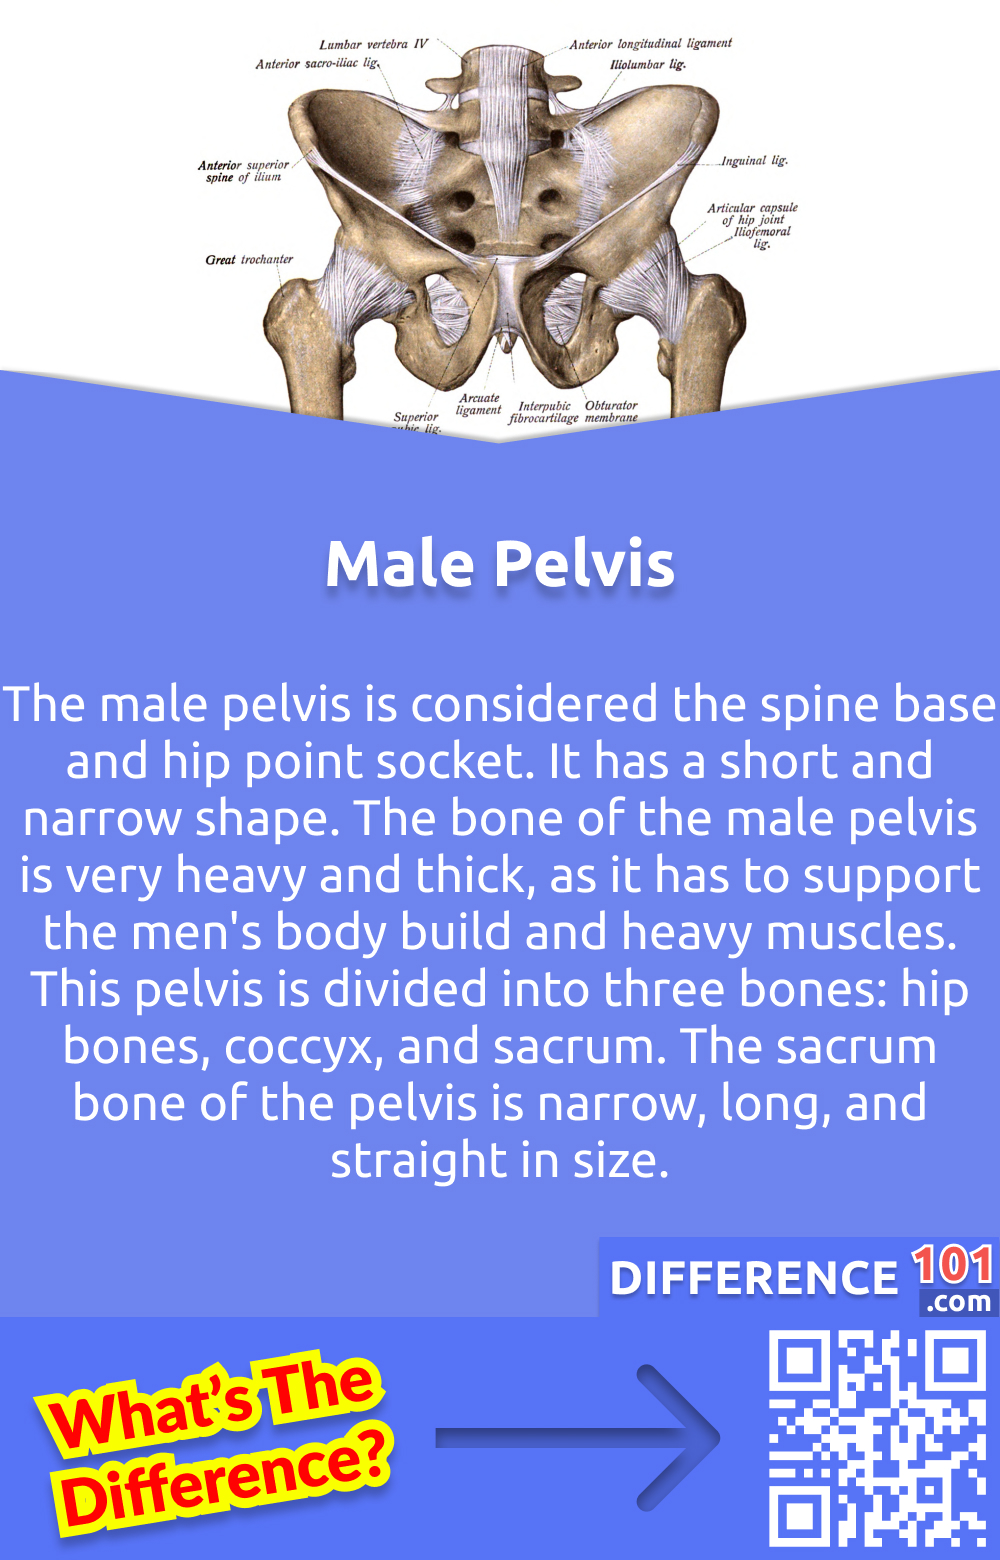 What Is The Male Pelvis? The male pelvis is considered the spine base and hip point socket. It has a short and narrow shape. The bone of the male pelvis is very heavy and thick, as it has to support the men's body build and heavy muscles. This pelvis is divided into three bones: hip bones, coccyx, and sacrum. The sacrum bone of the pelvis is narrow, long, and straight in size. The pelvic inlet of men is heart-shaped. And the pubic arch is V-shaped, with an angle of less than 90°. The coccyx of the male pelvis is immovable and located inwards, with less curved from the anterior side.